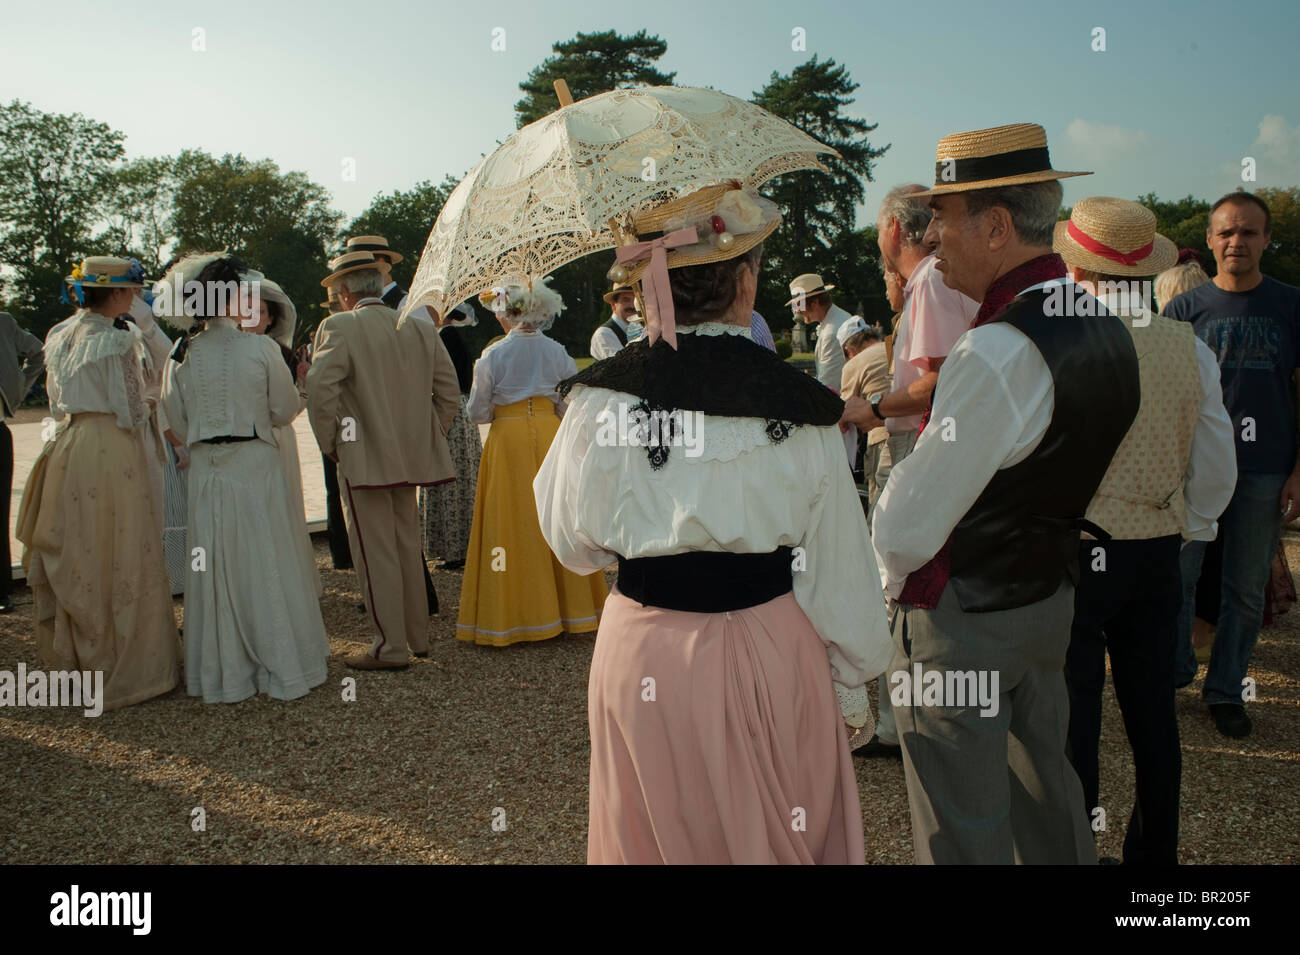 France - Large Crowd of People, Senior Adults Standing outside, Rear, at Traditional Dance, Chateau de Breteuil, Choisel, Families Dressed in Period Costumes, Fancy Dress, Couples, elderly people, vintage dress, Retro bal france Stock Photo